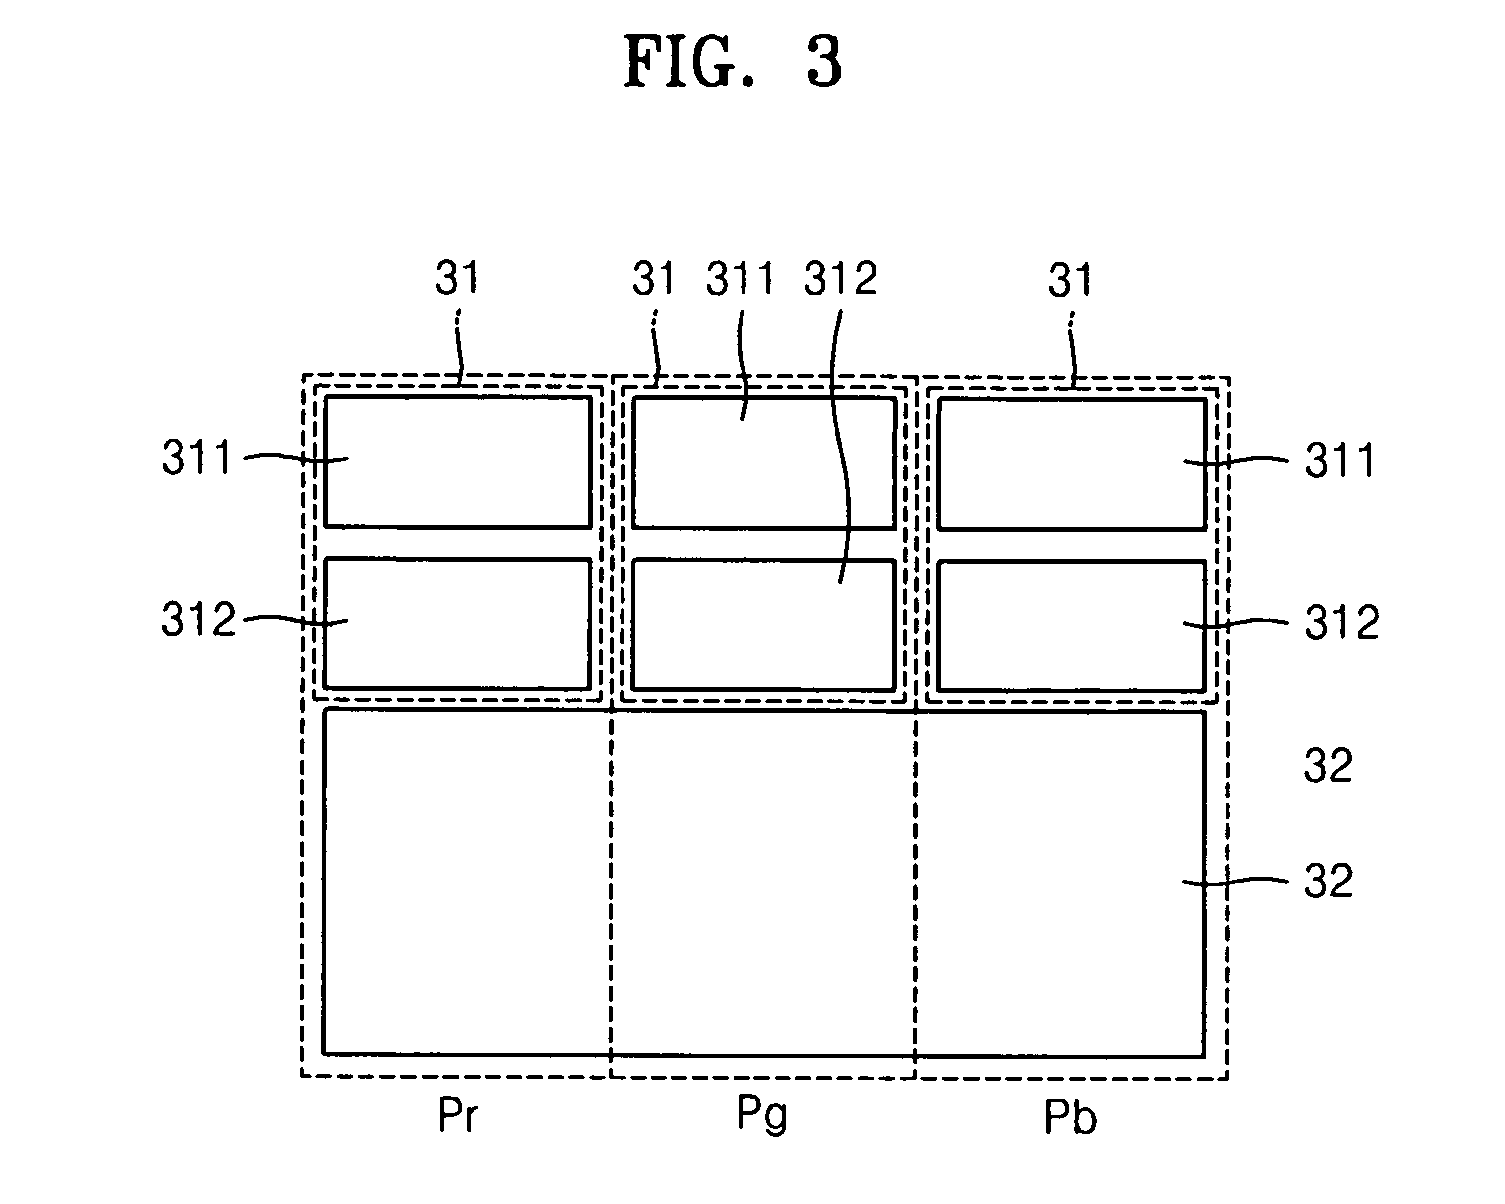 Display apparatus and method of operating the same